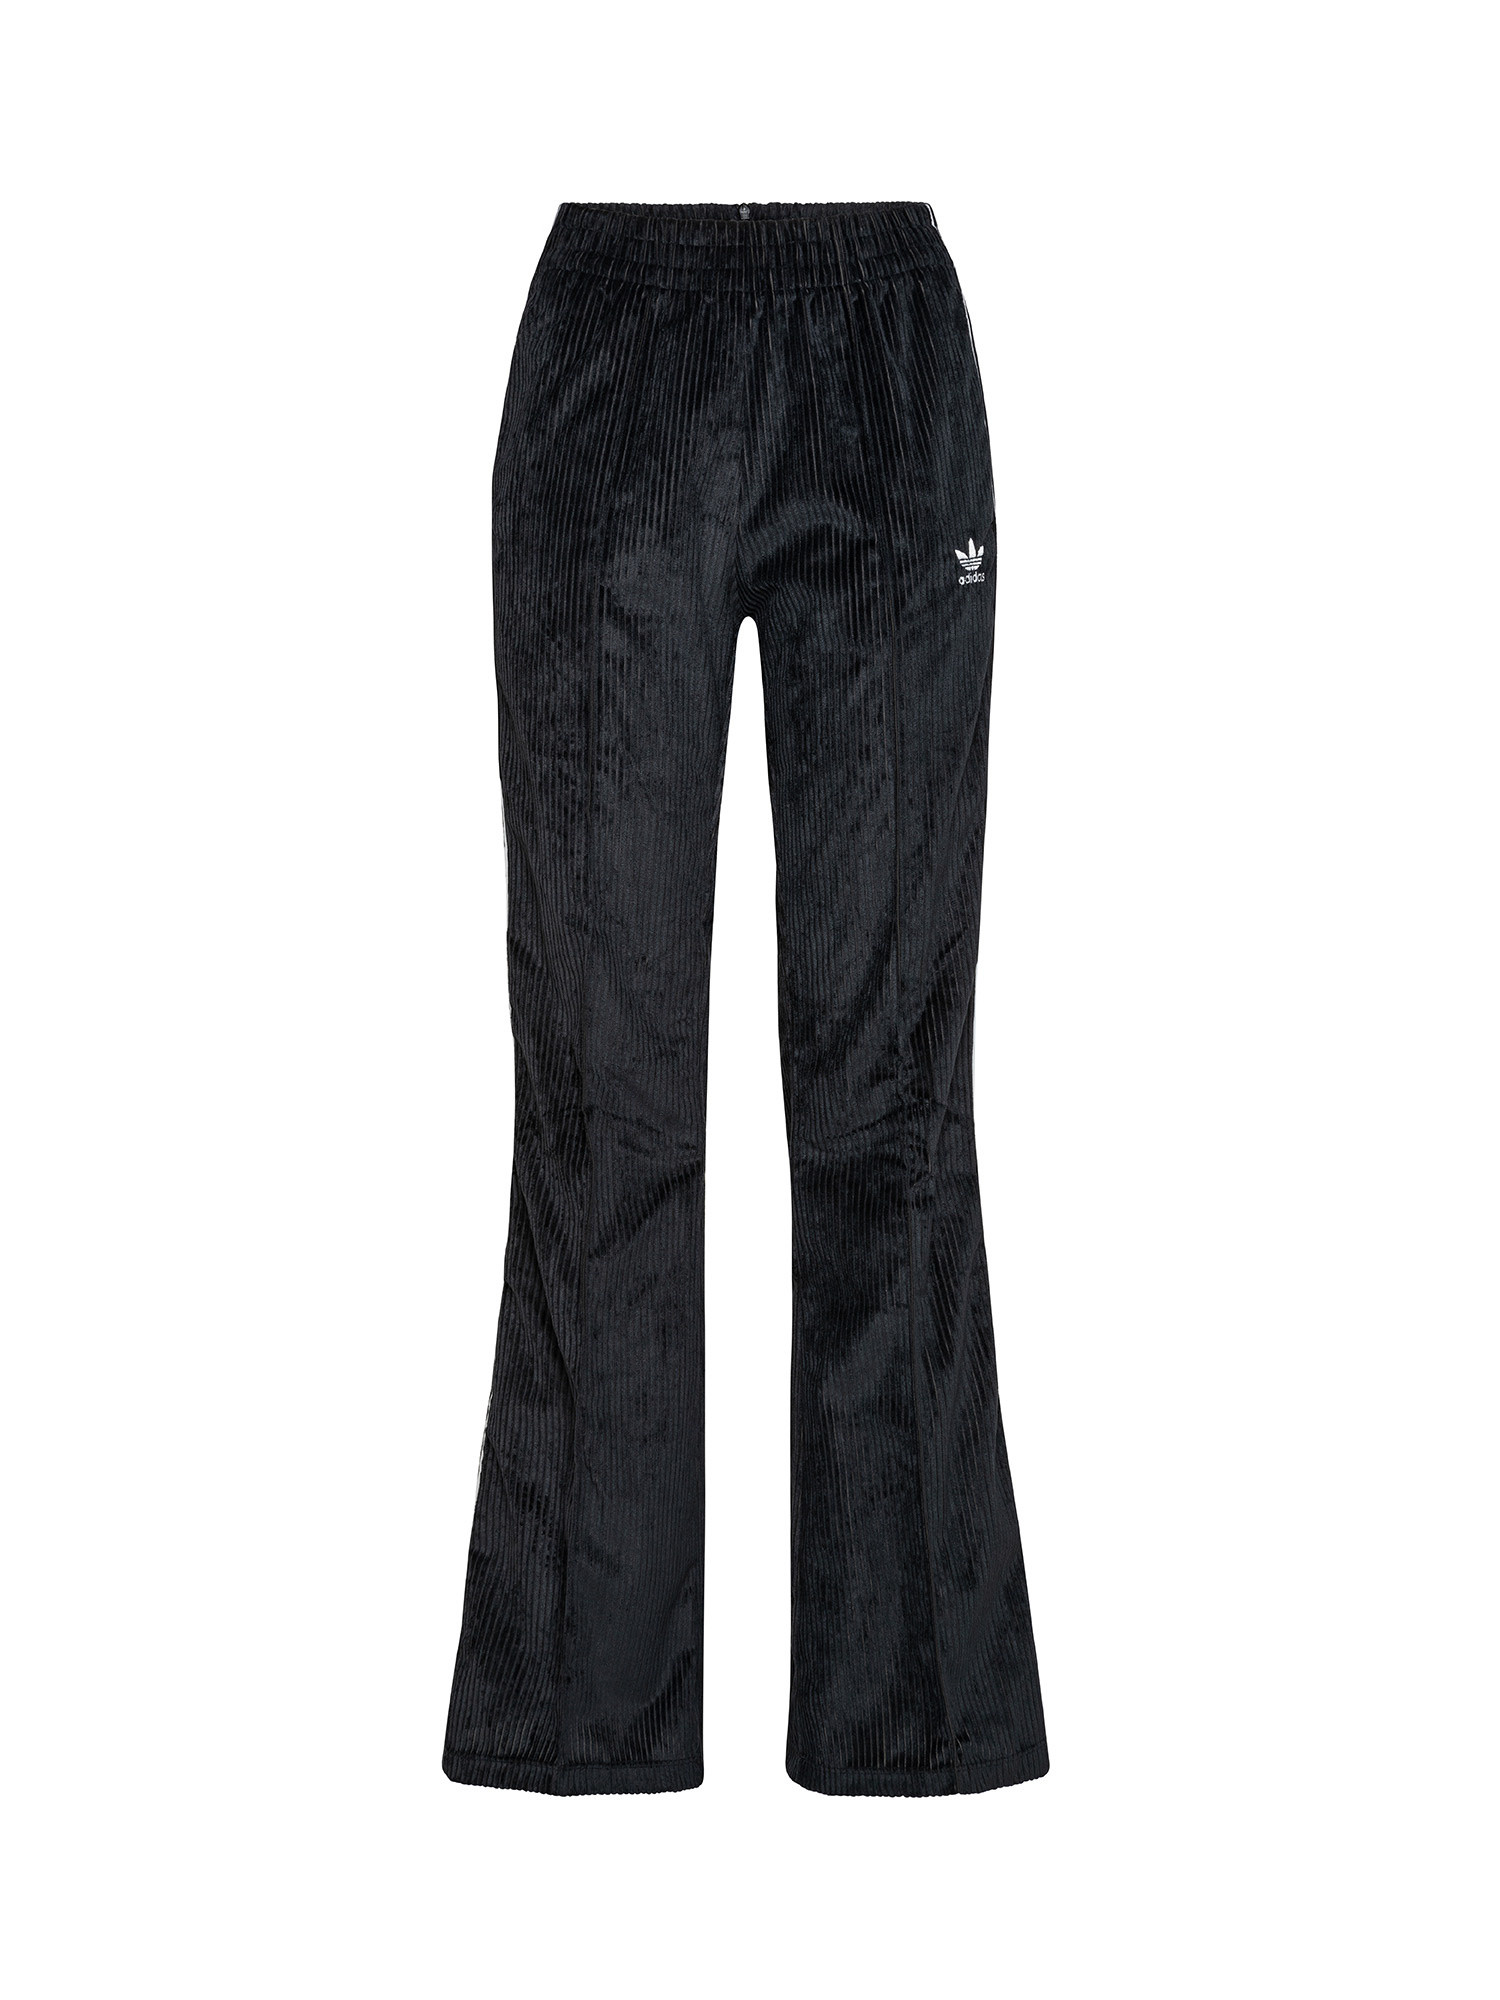 Relaxed Pant, Black, large image number 0